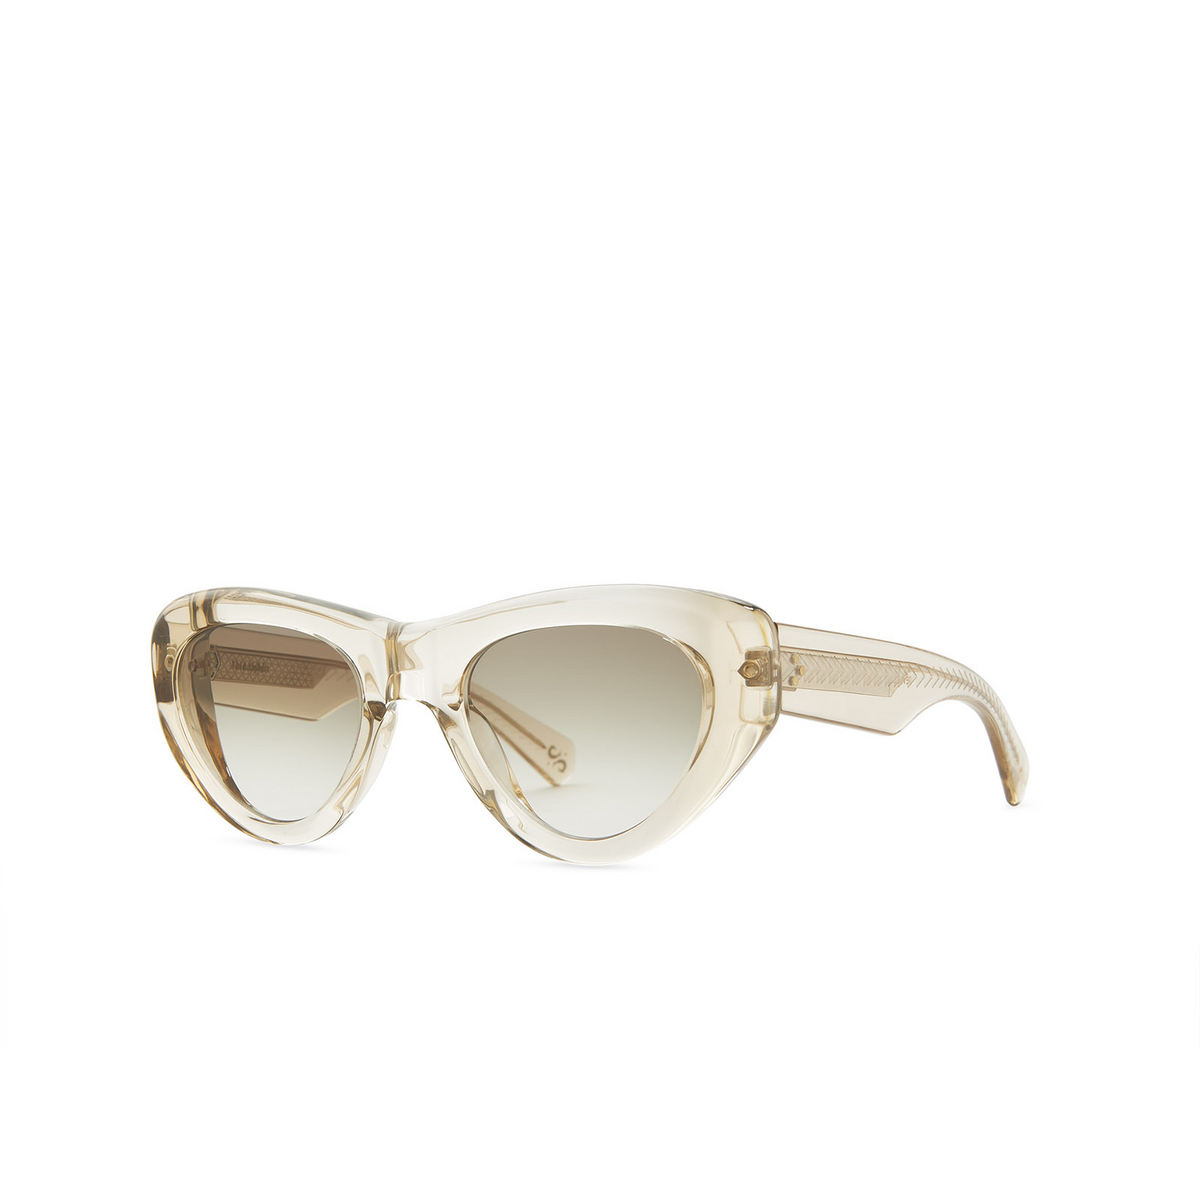 Mr. Leight REVELER S Sunglasses CHAND-12KG/SFFERNG Chandelier-12K White Gold - three-quarters view